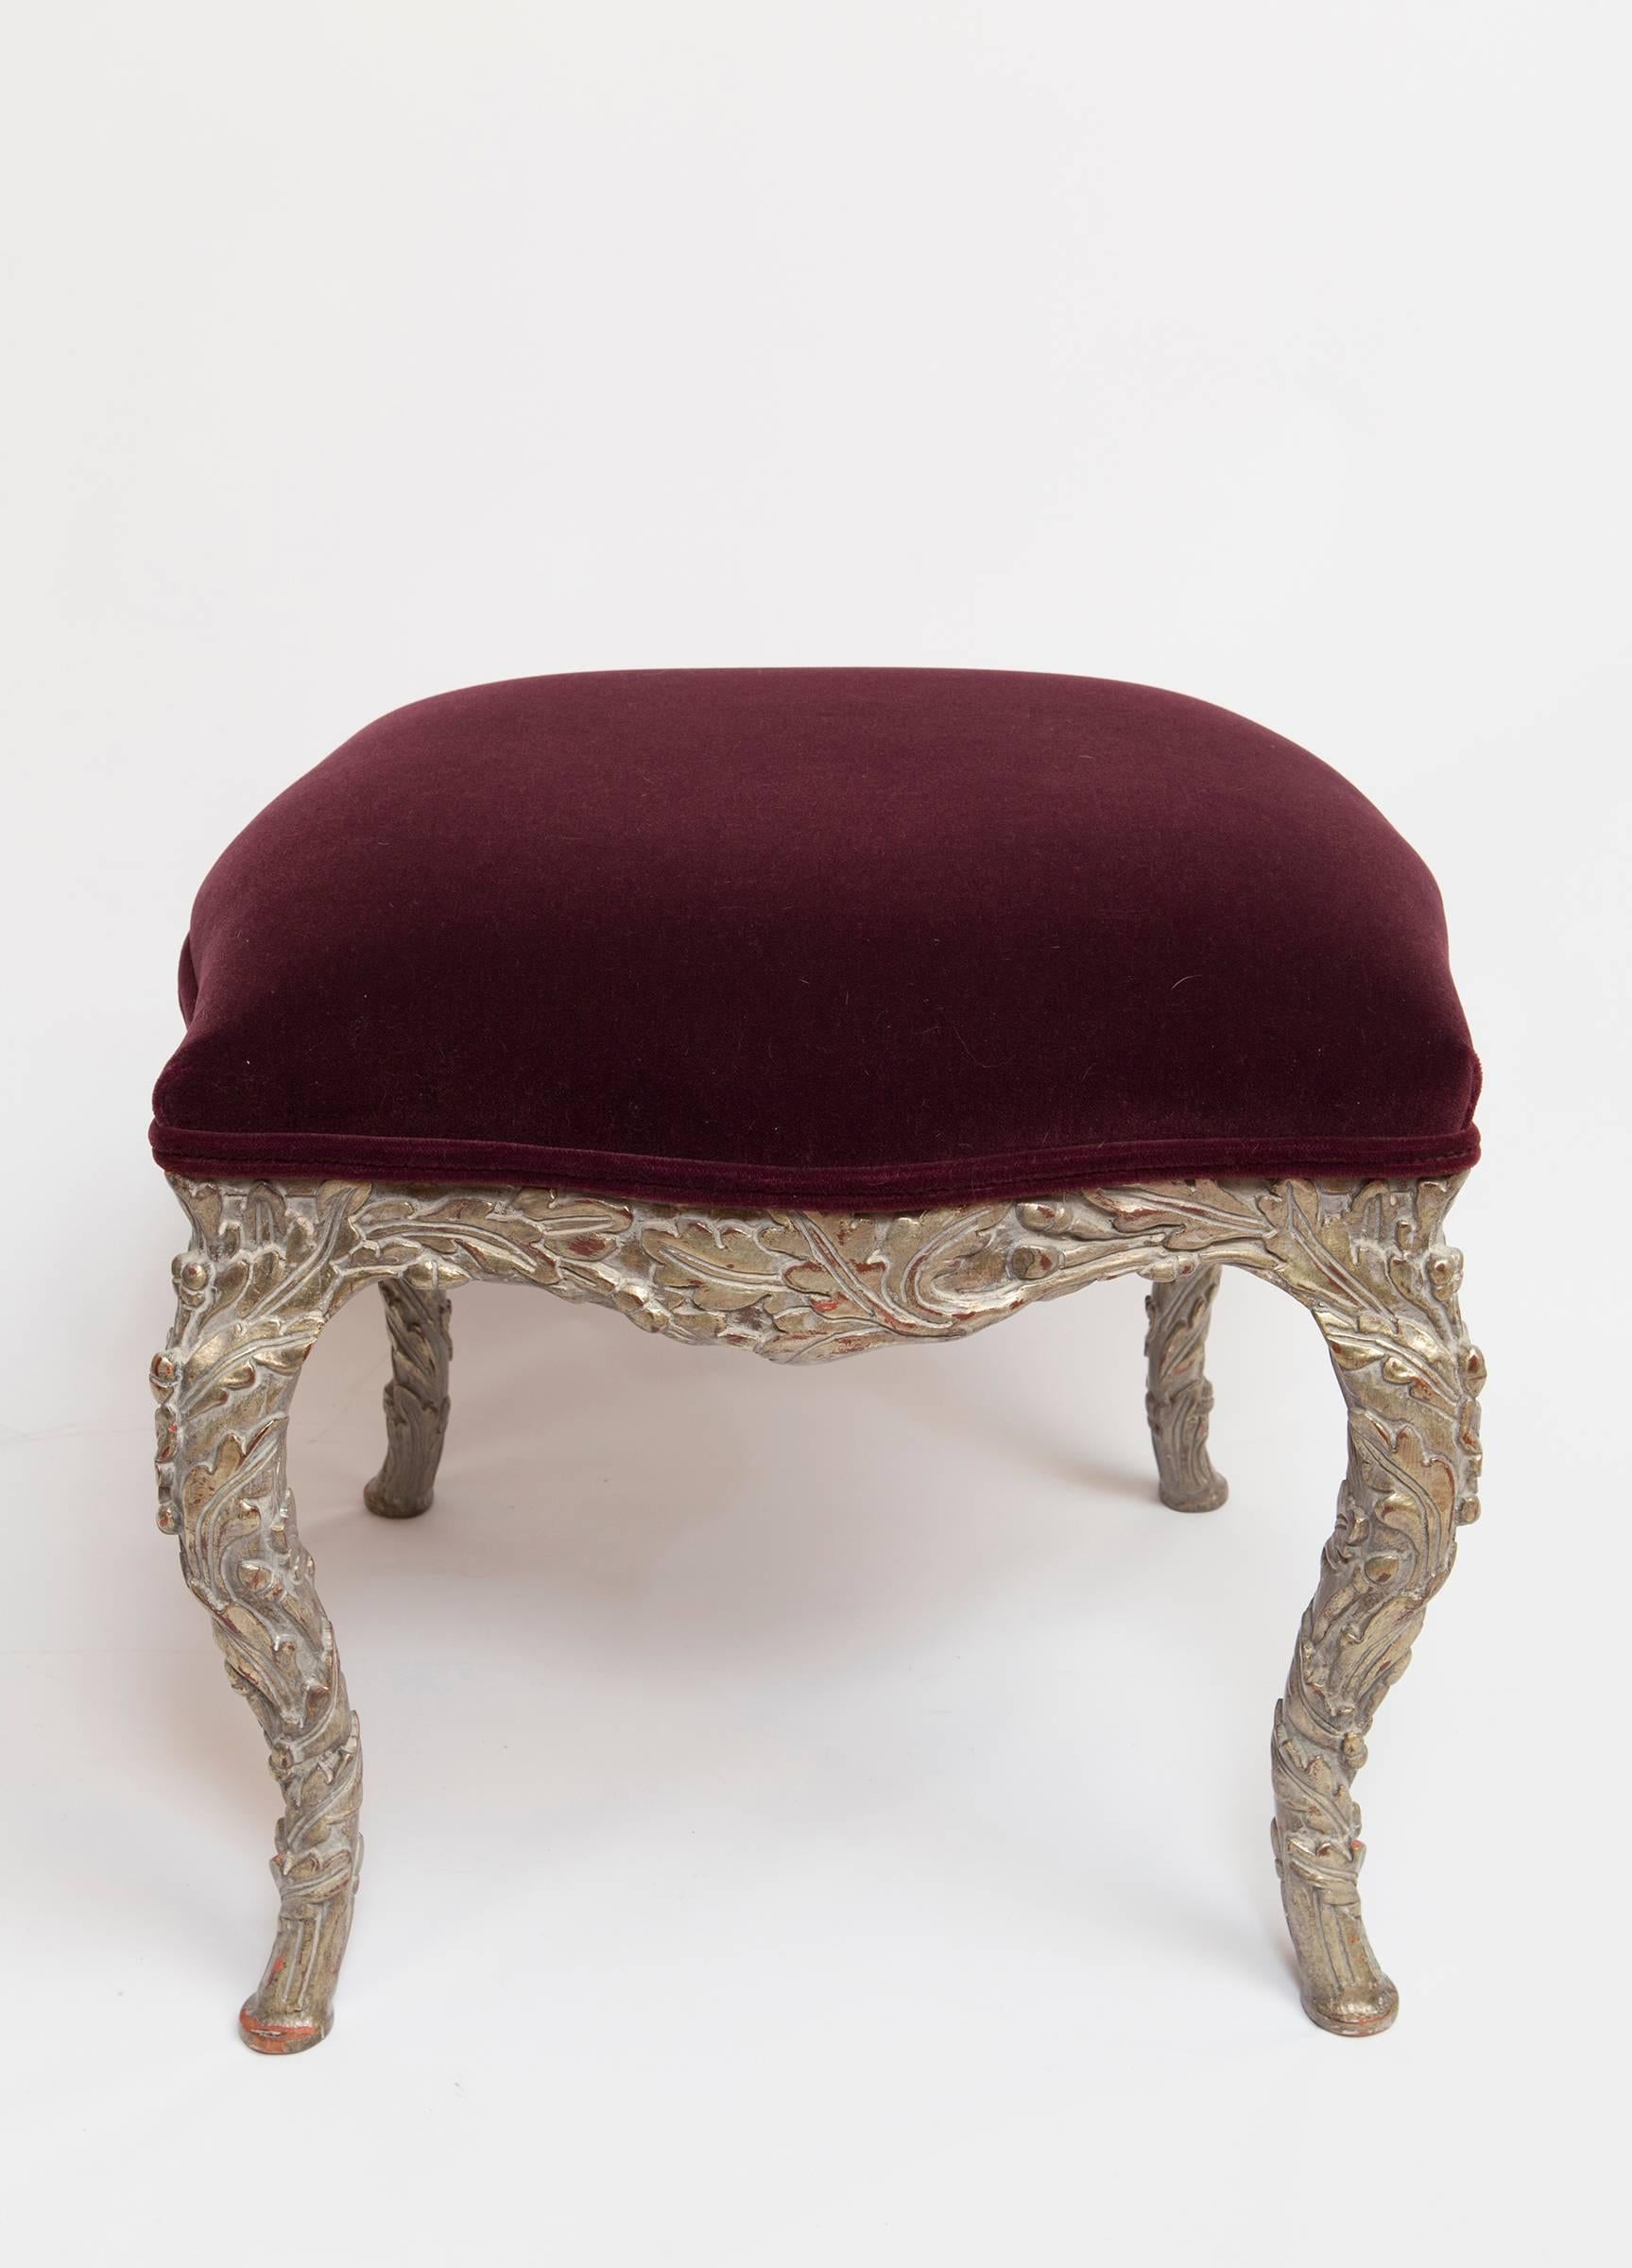 Pair of wood carved stools upholstered in burgundy mohair velvet fabric. The pair of stools are finished in a distressed rubbed silver gilt. The carving is very beautiful in a leaf detail. The size in a generous 21